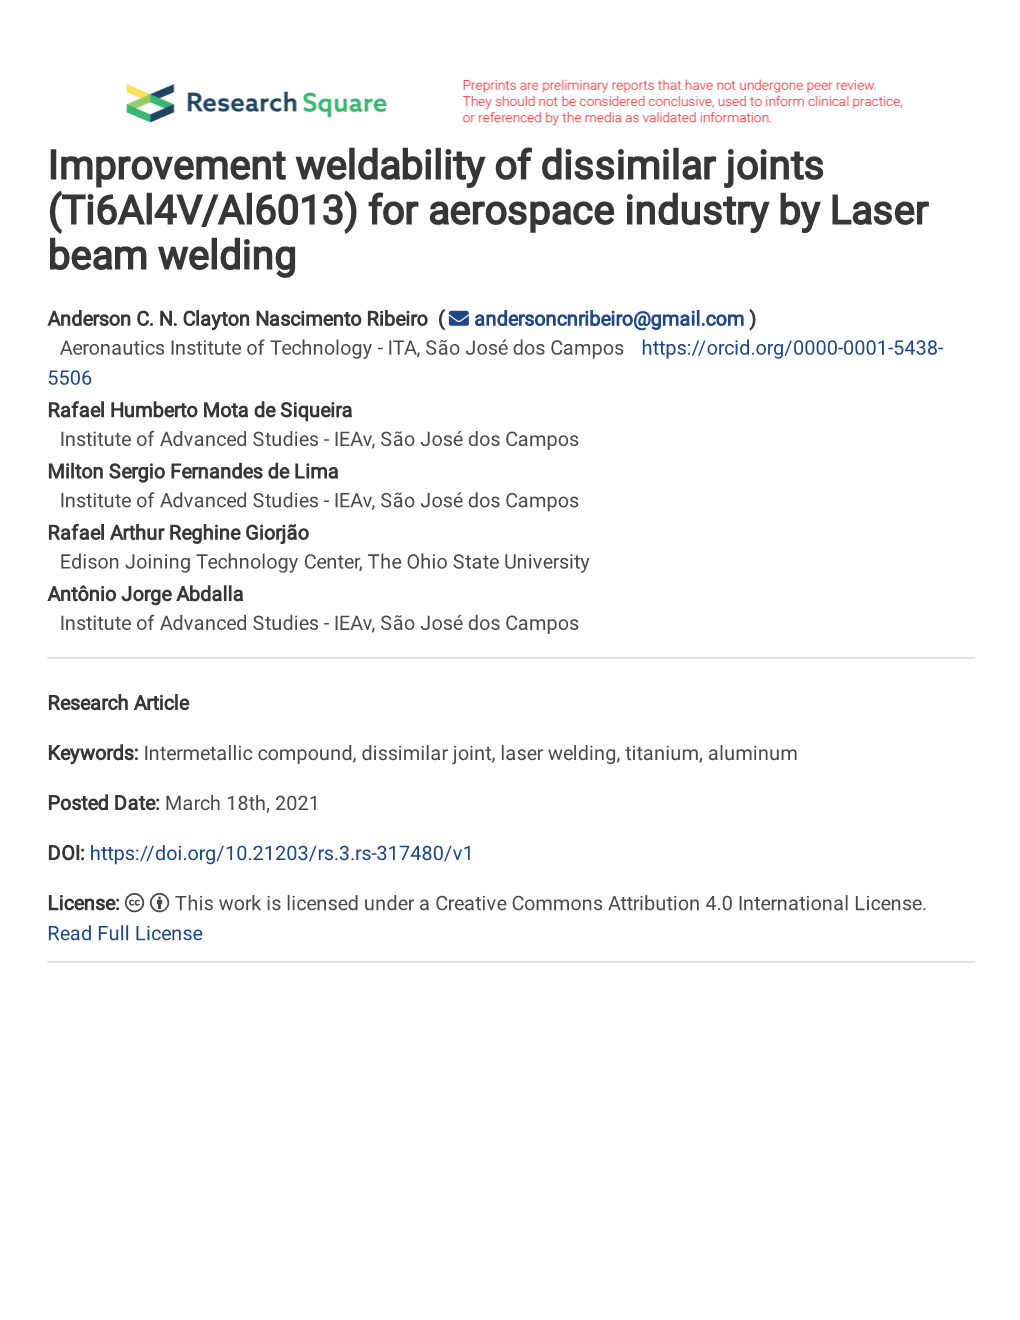 For Aerospace Industry by Laser Beam Welding Anderson Clayton Nasc